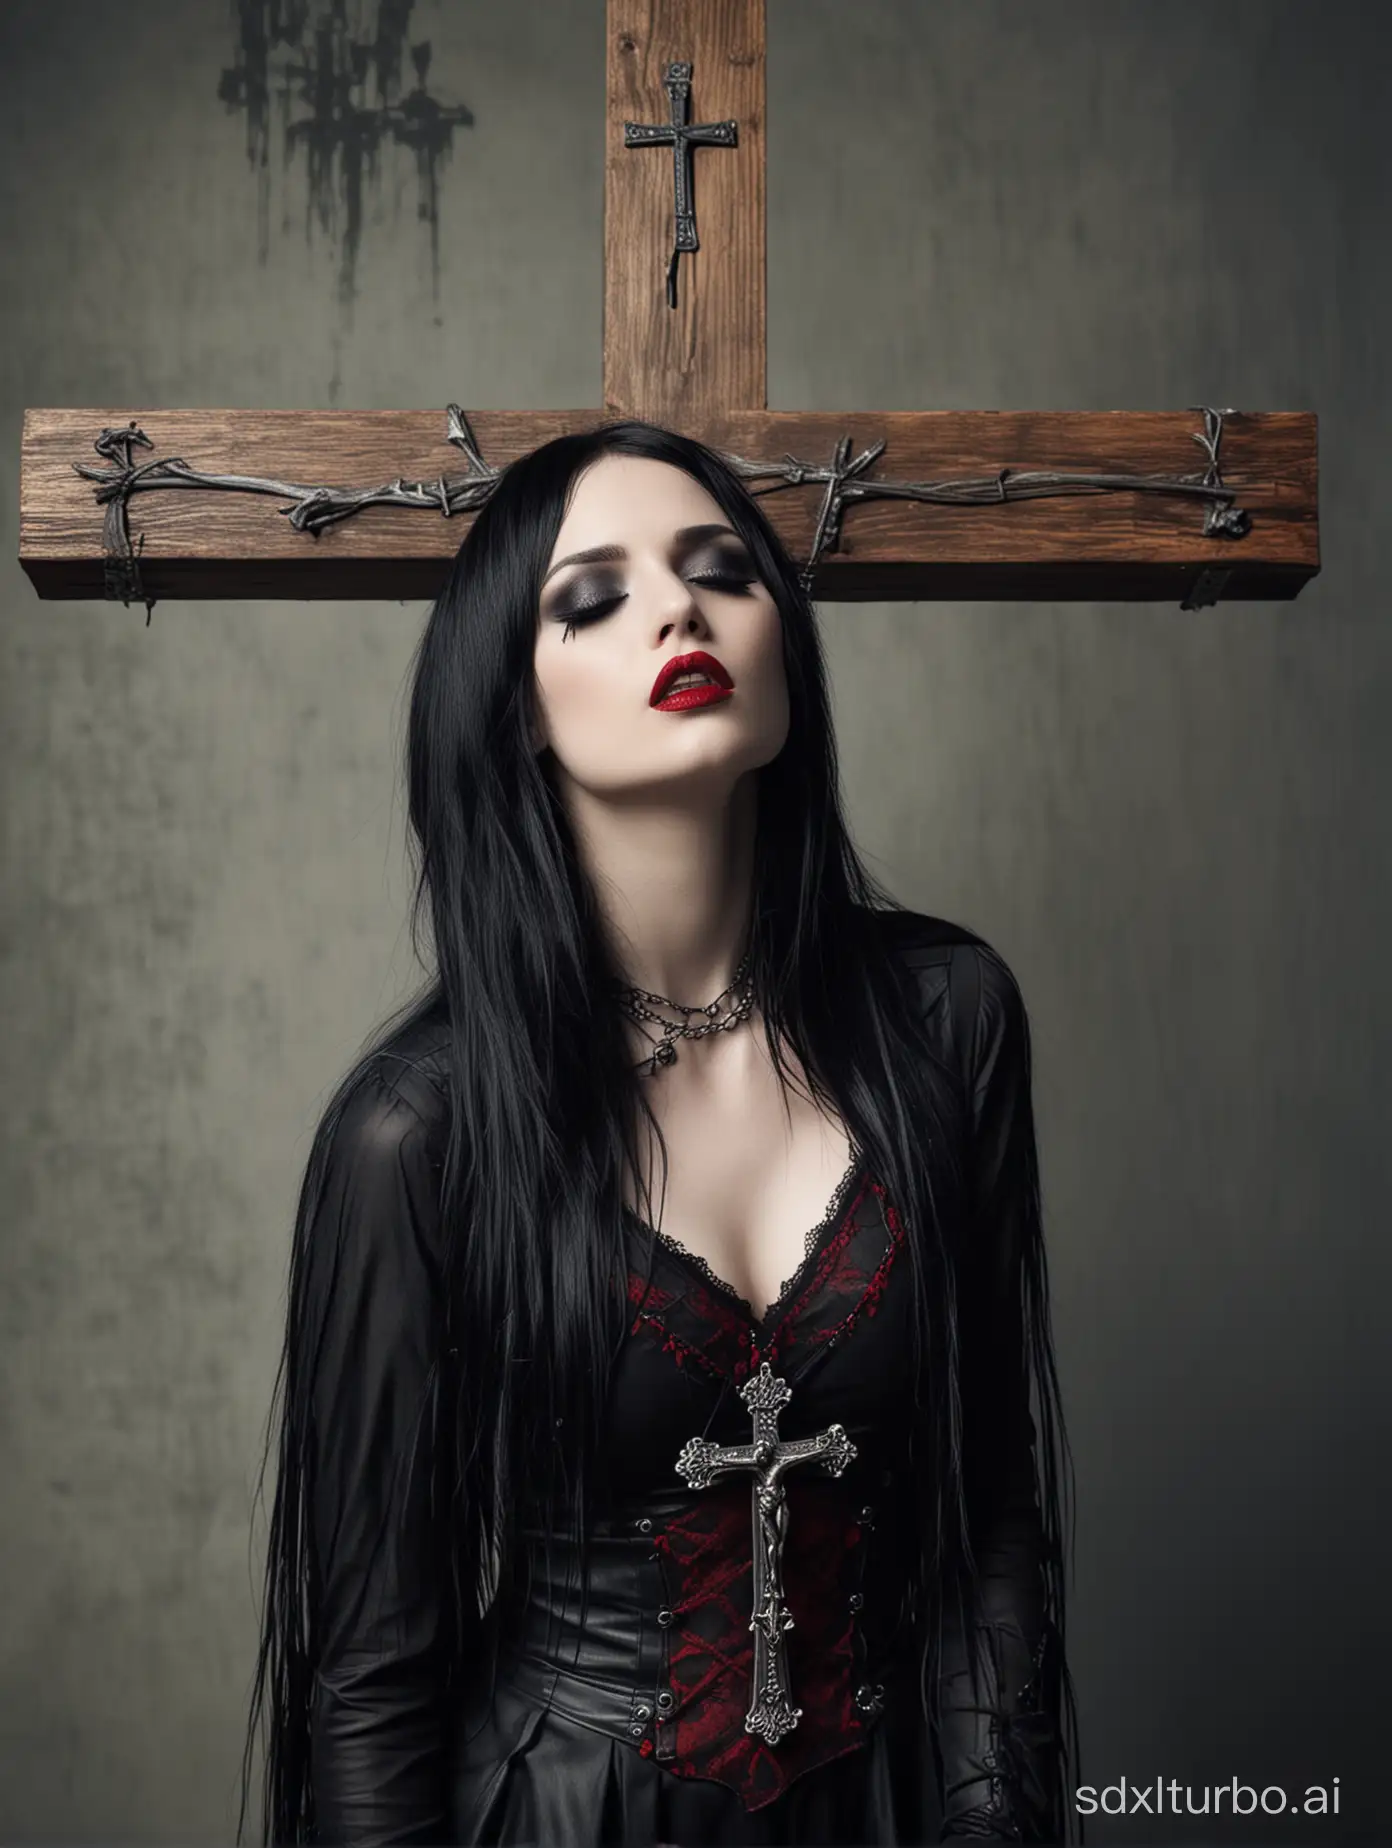 Girl, gothic style, 30 years old, long black hair, fringe, full white eyes, very clear skin, heavy make up, dark make up, gothic make up, red lips, crucified on a cross, eyes closed, head inclined left, full body photo